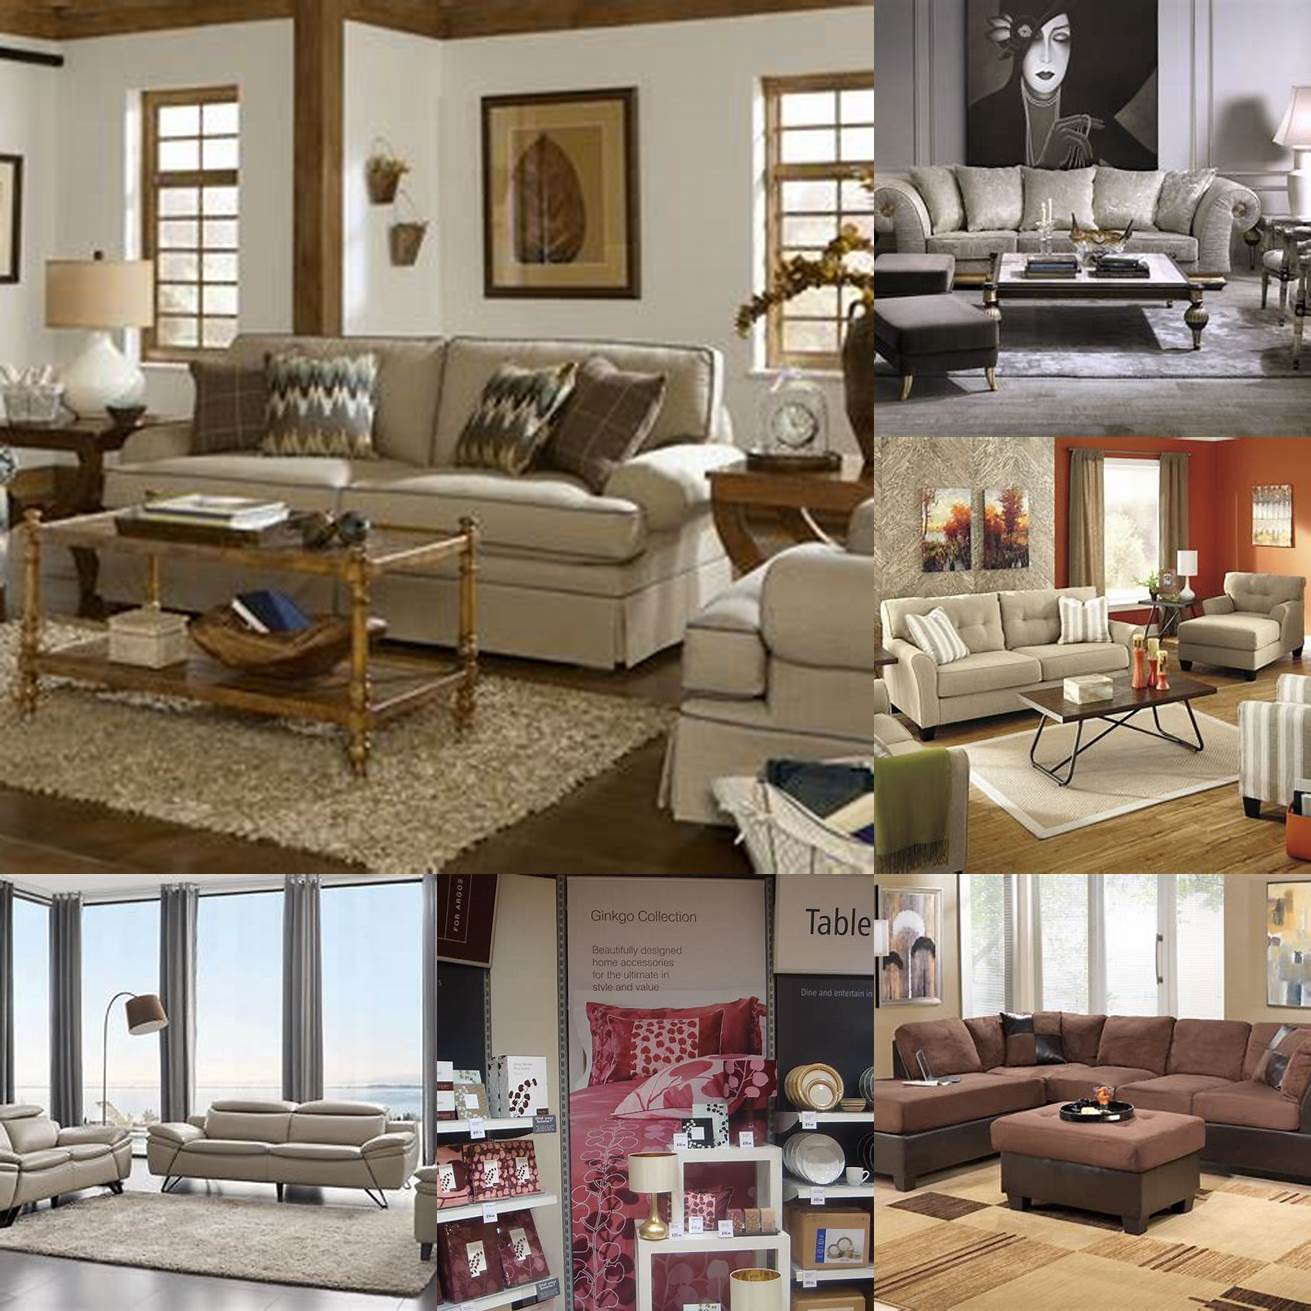 The furniture in a lifestyle setting